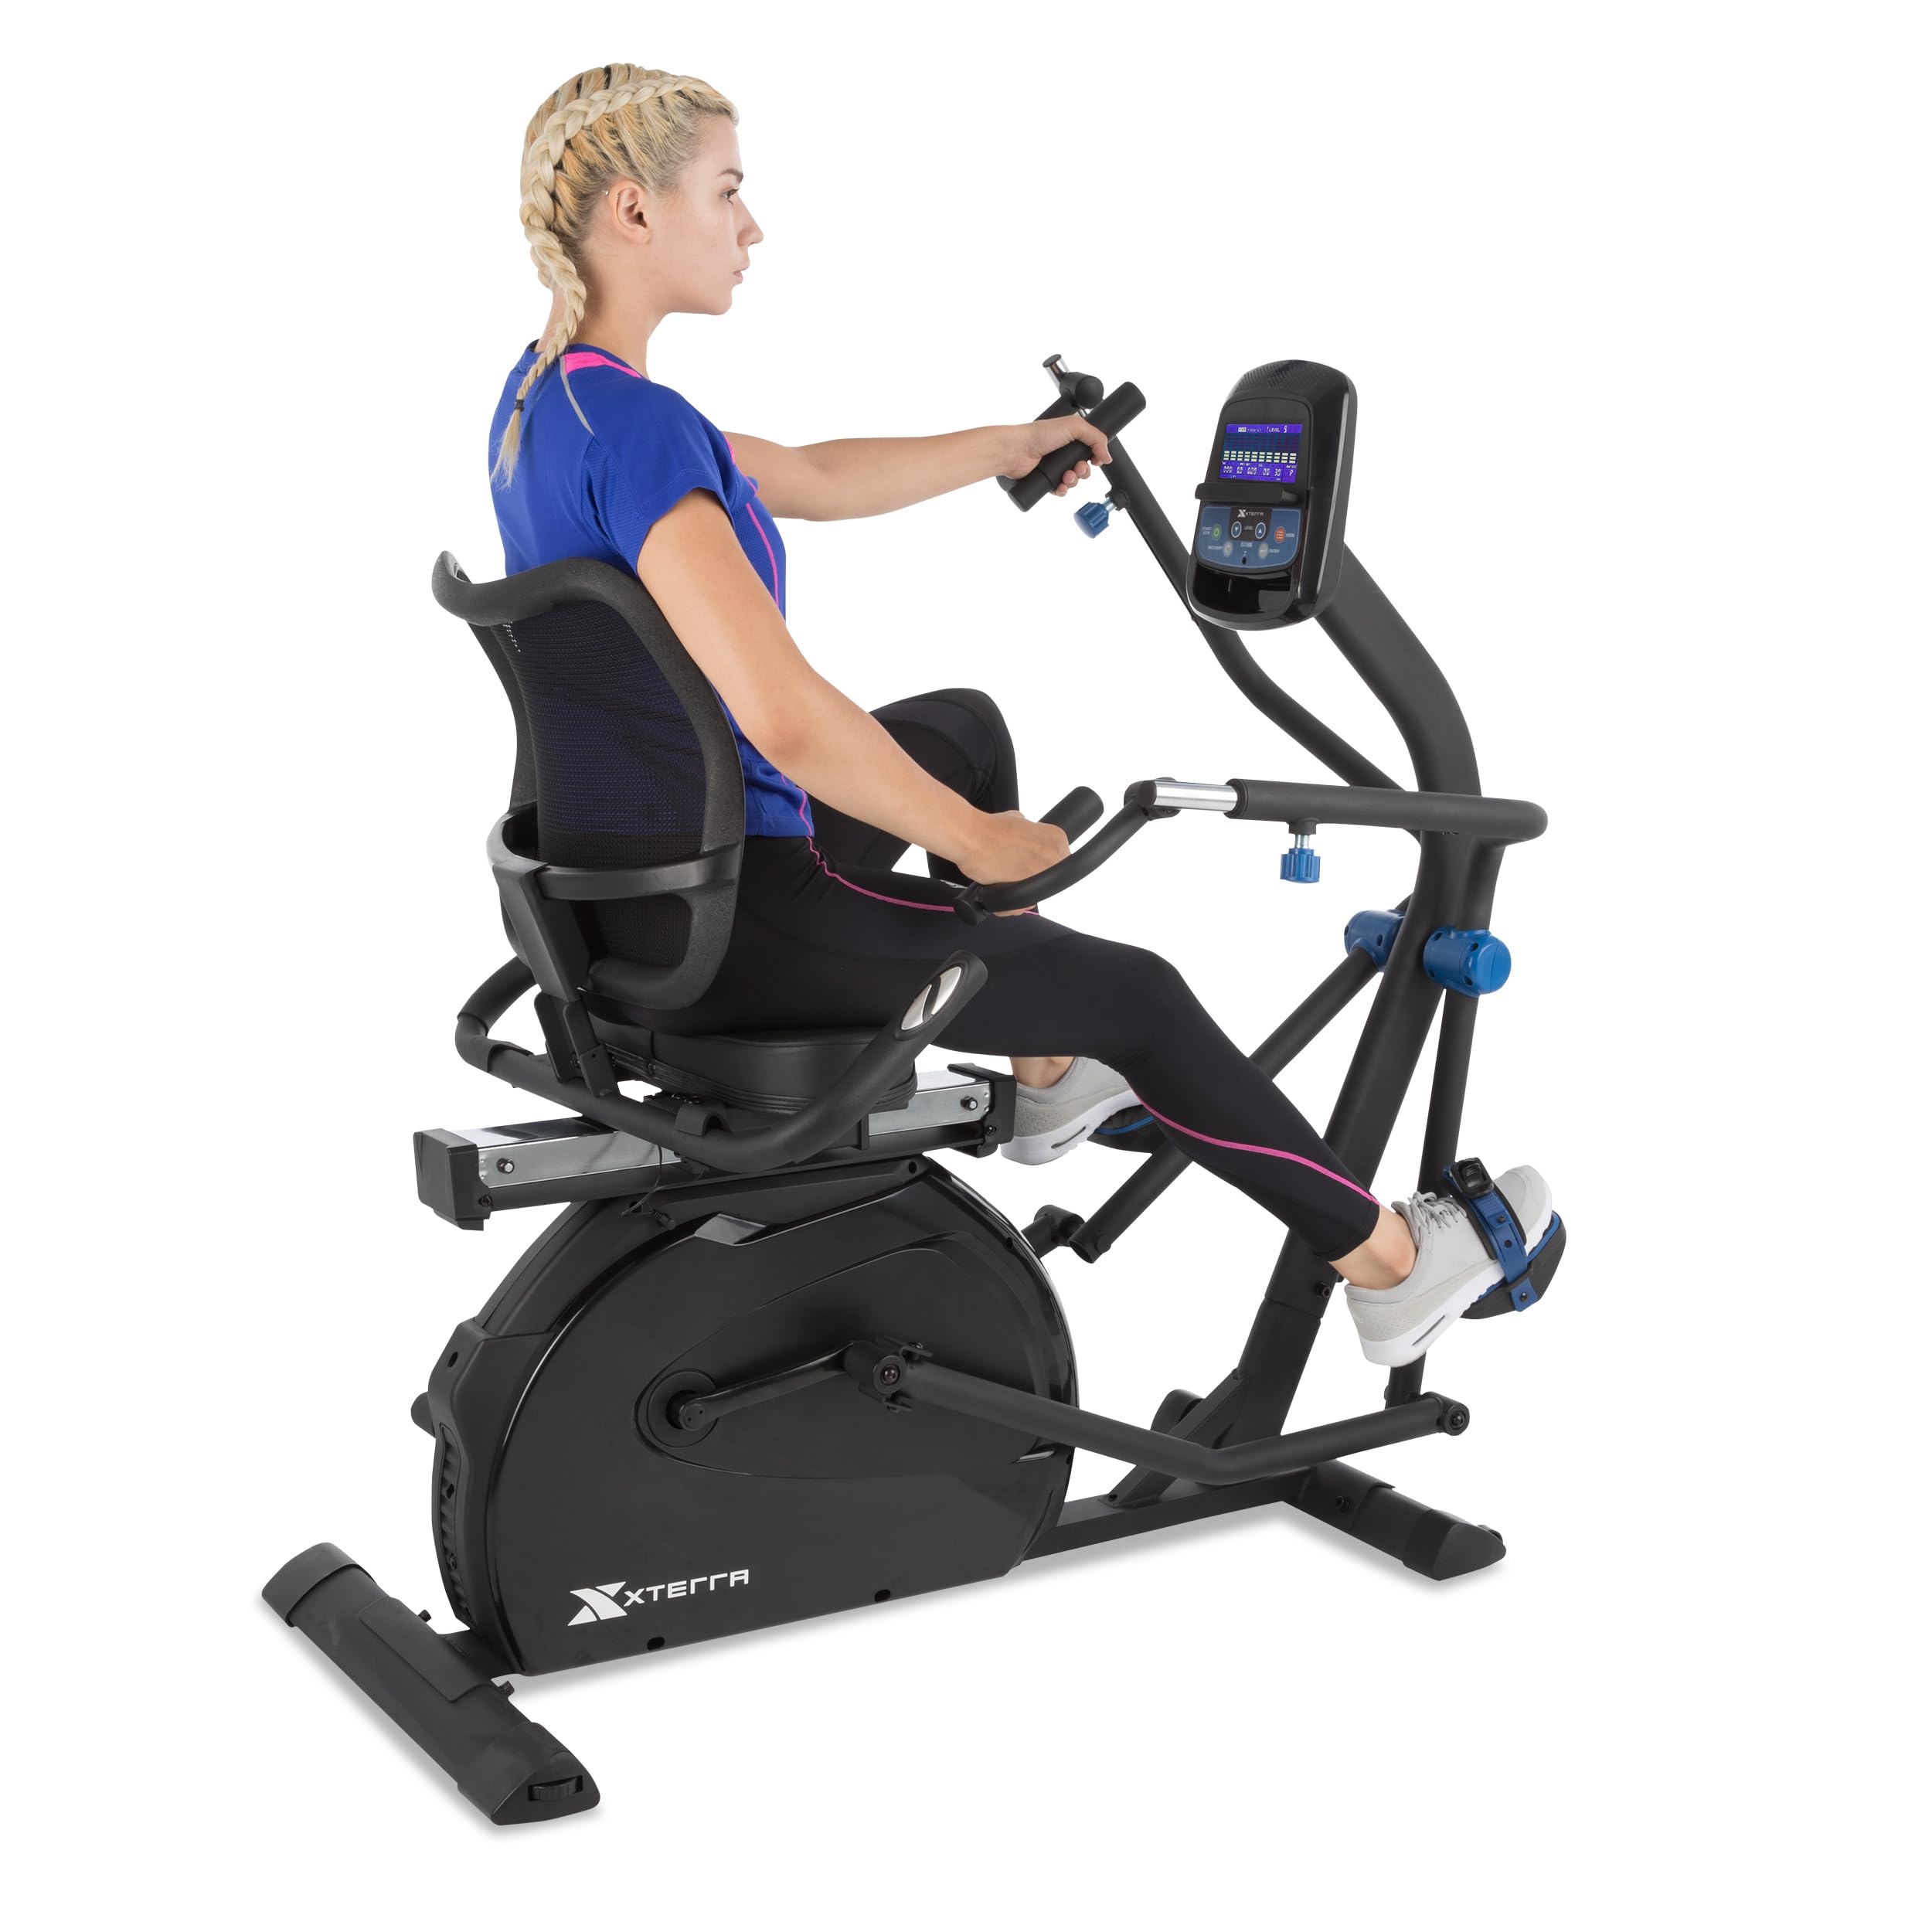 XTERRA Fitness RSX1500 Seated Stepper